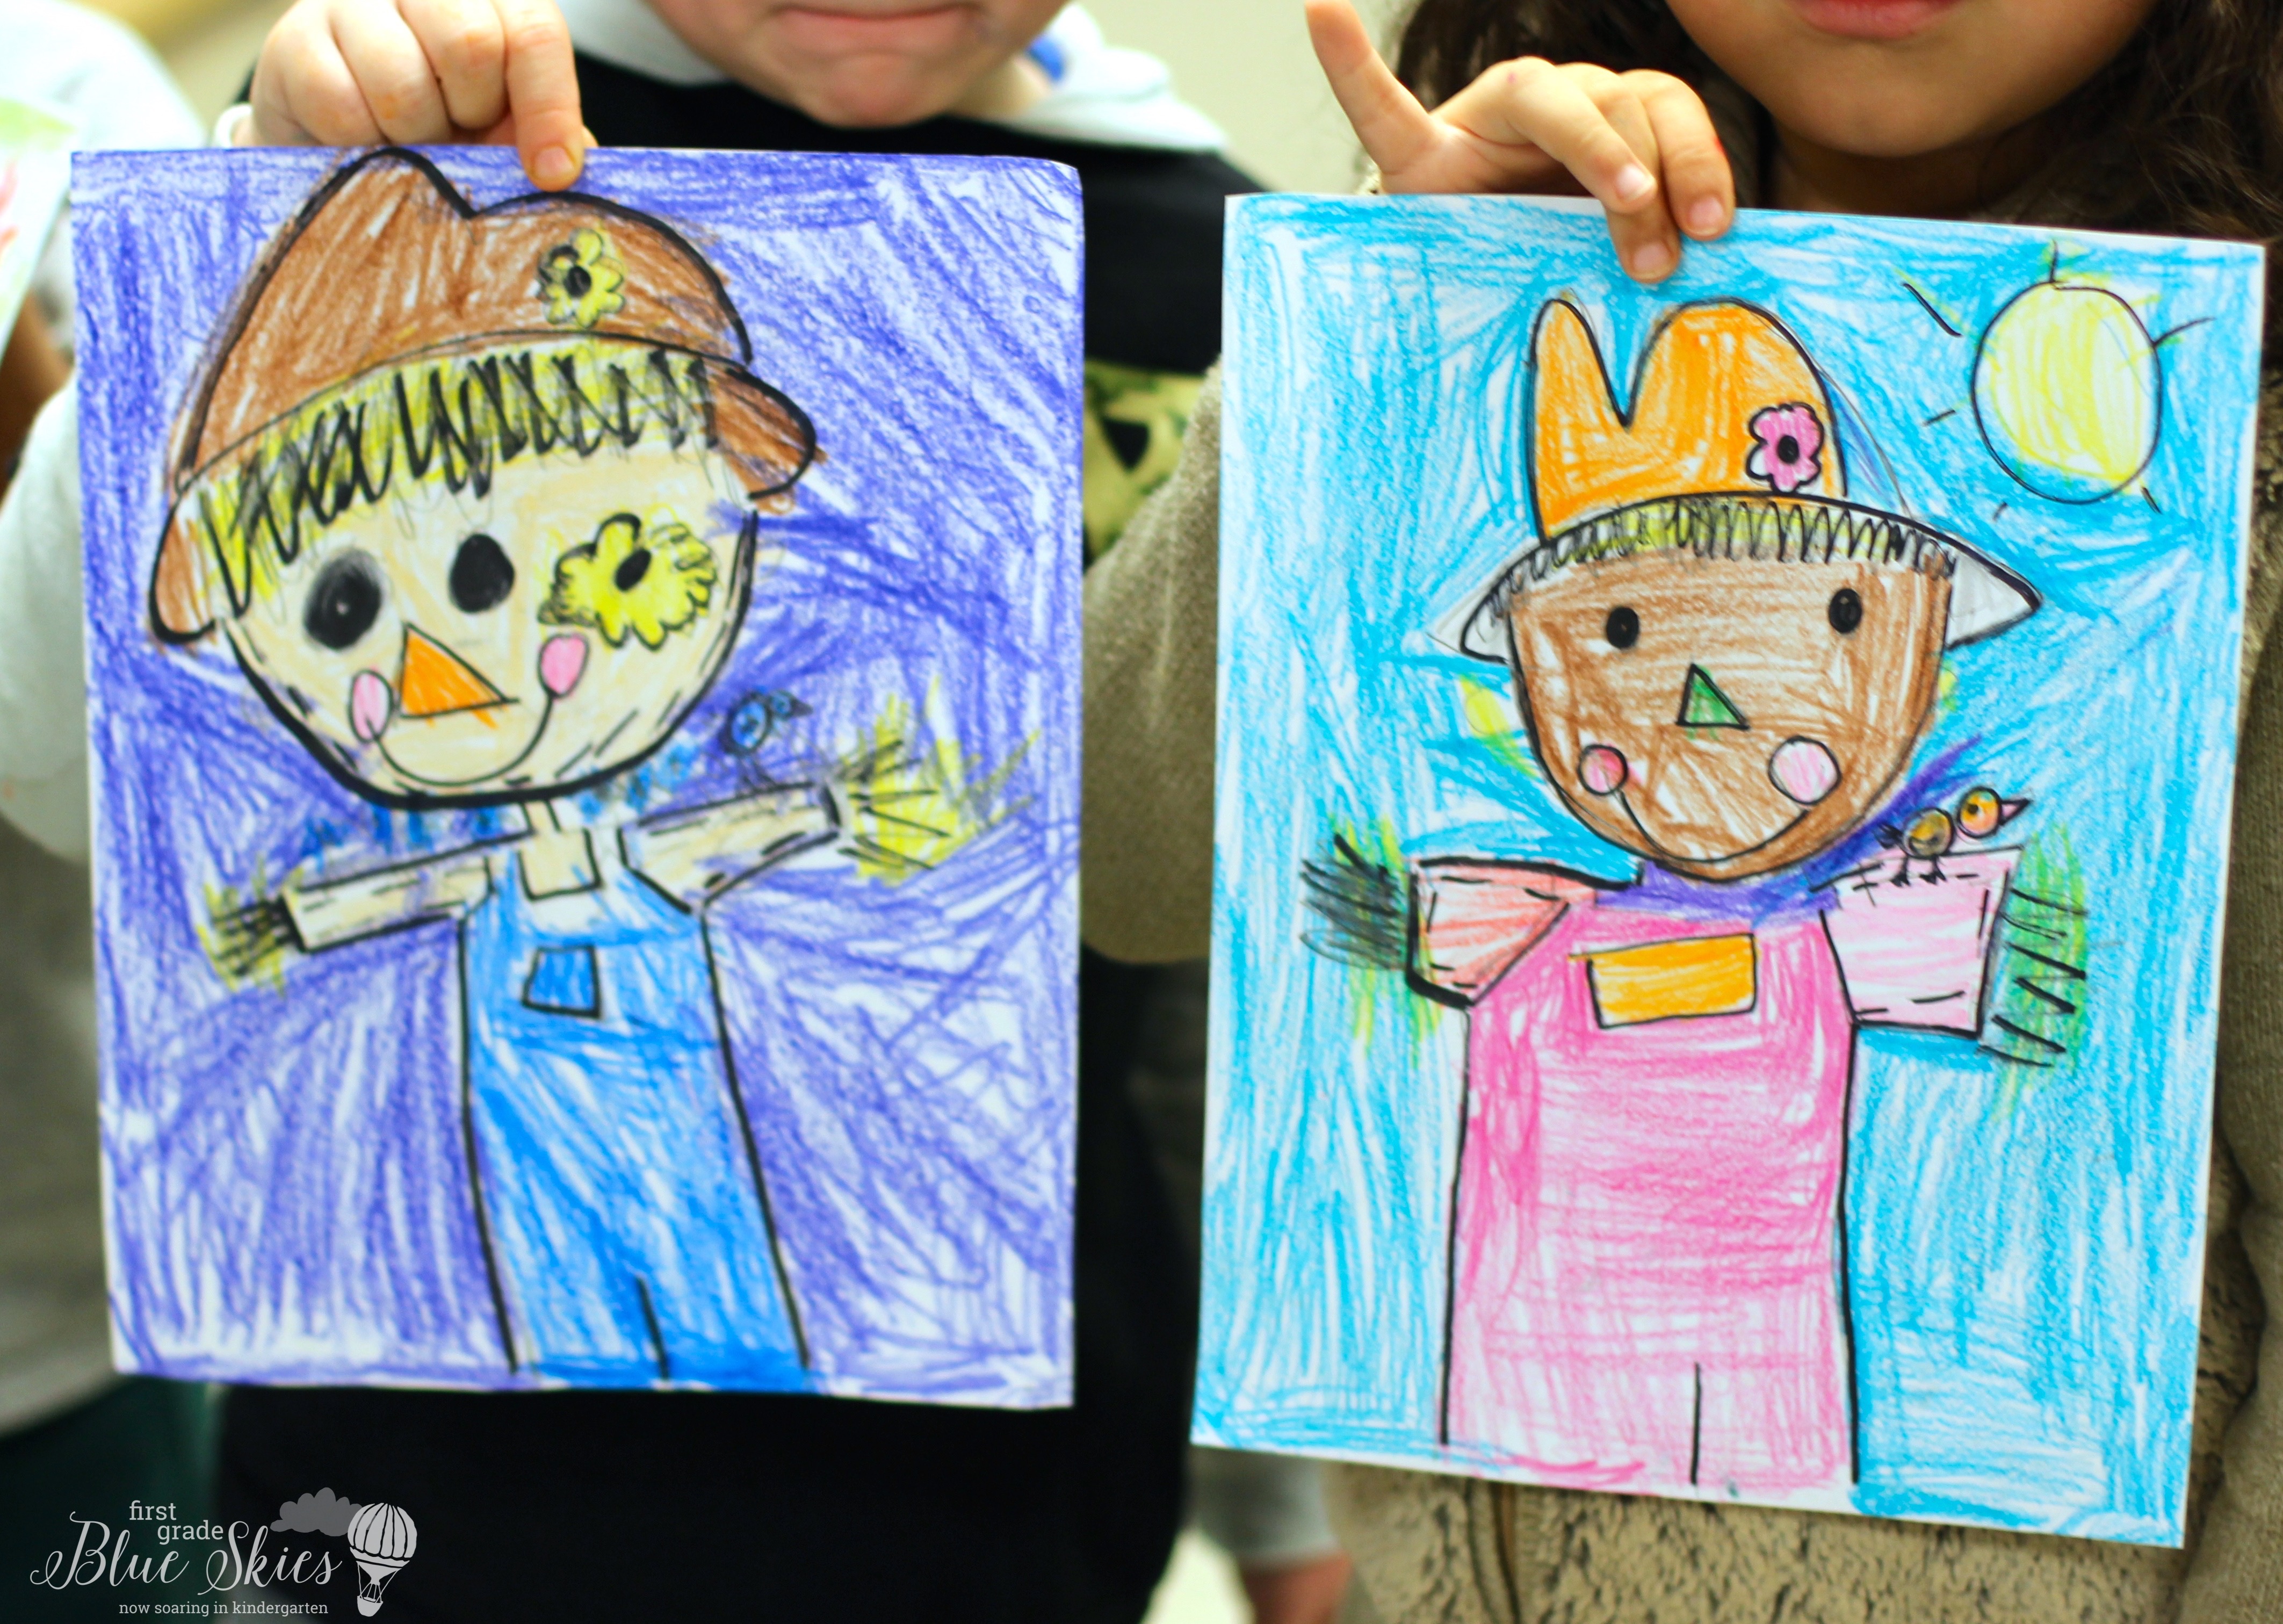 Scarecrow Directed Drawing First Grade Blue Skies Bloglovin’